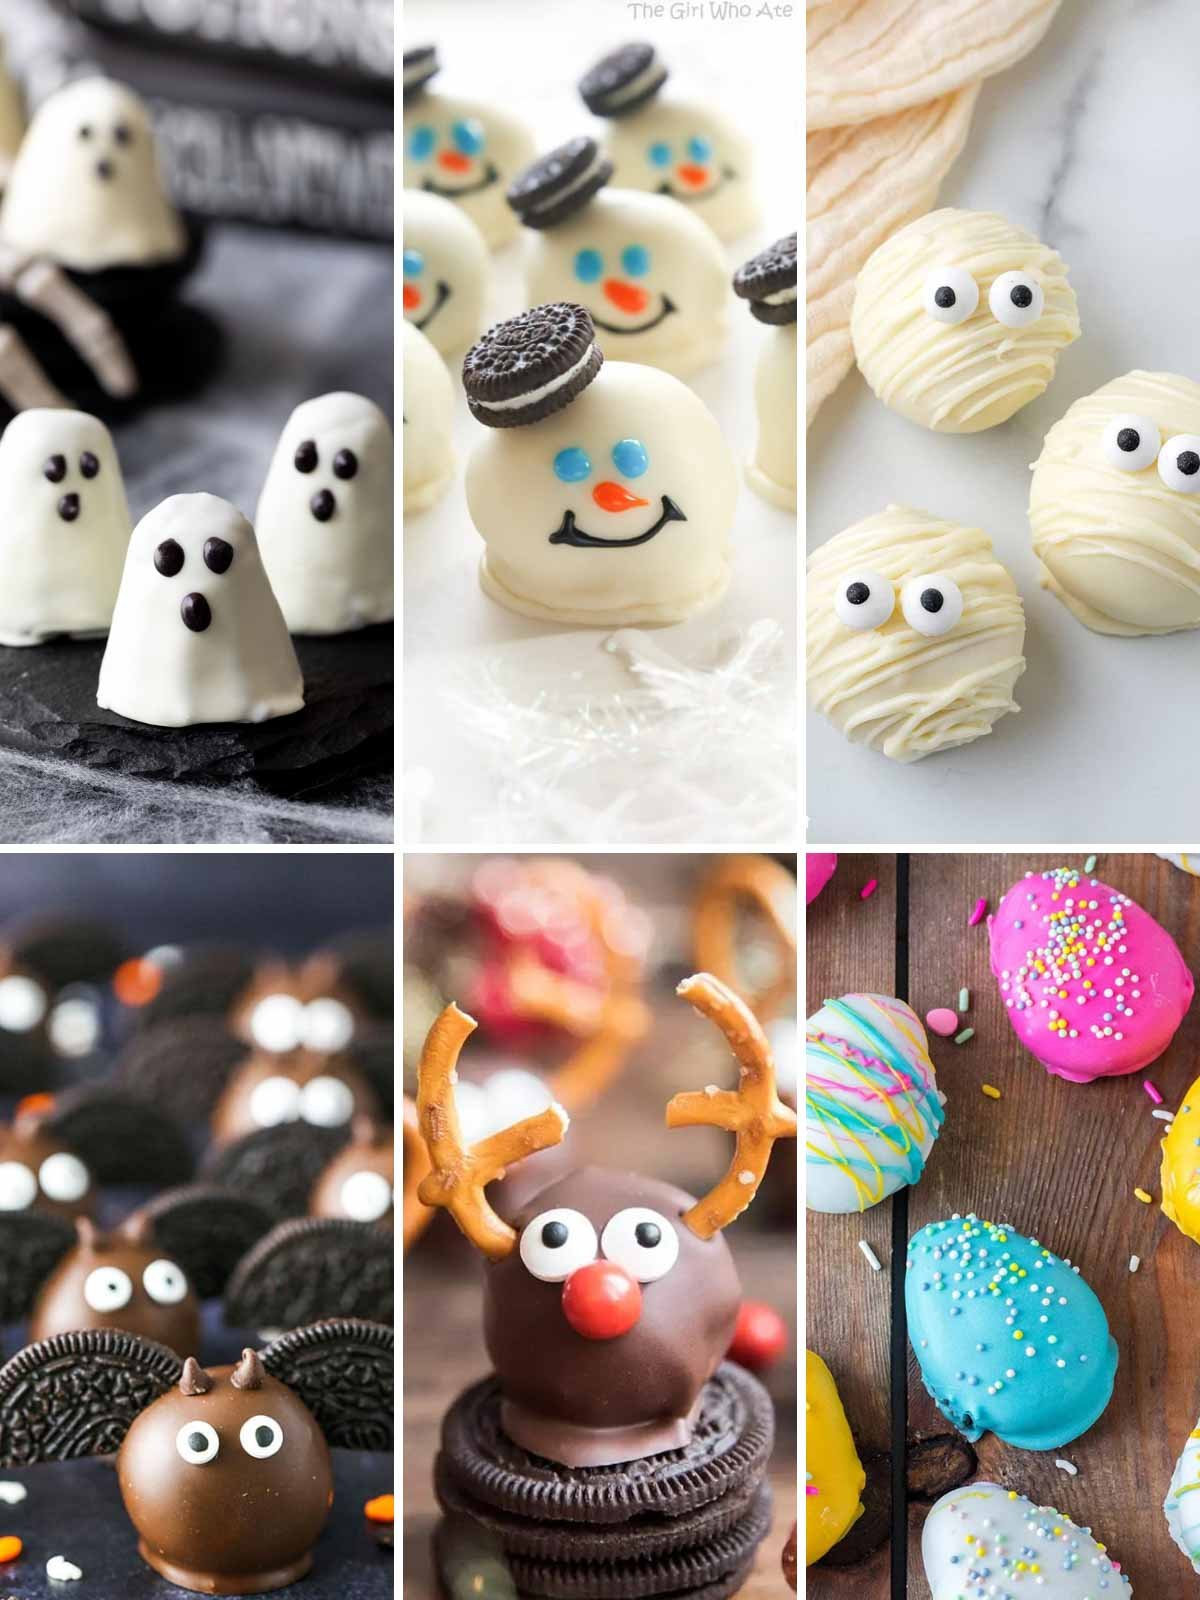 different decorating ideas for oreo truffles.